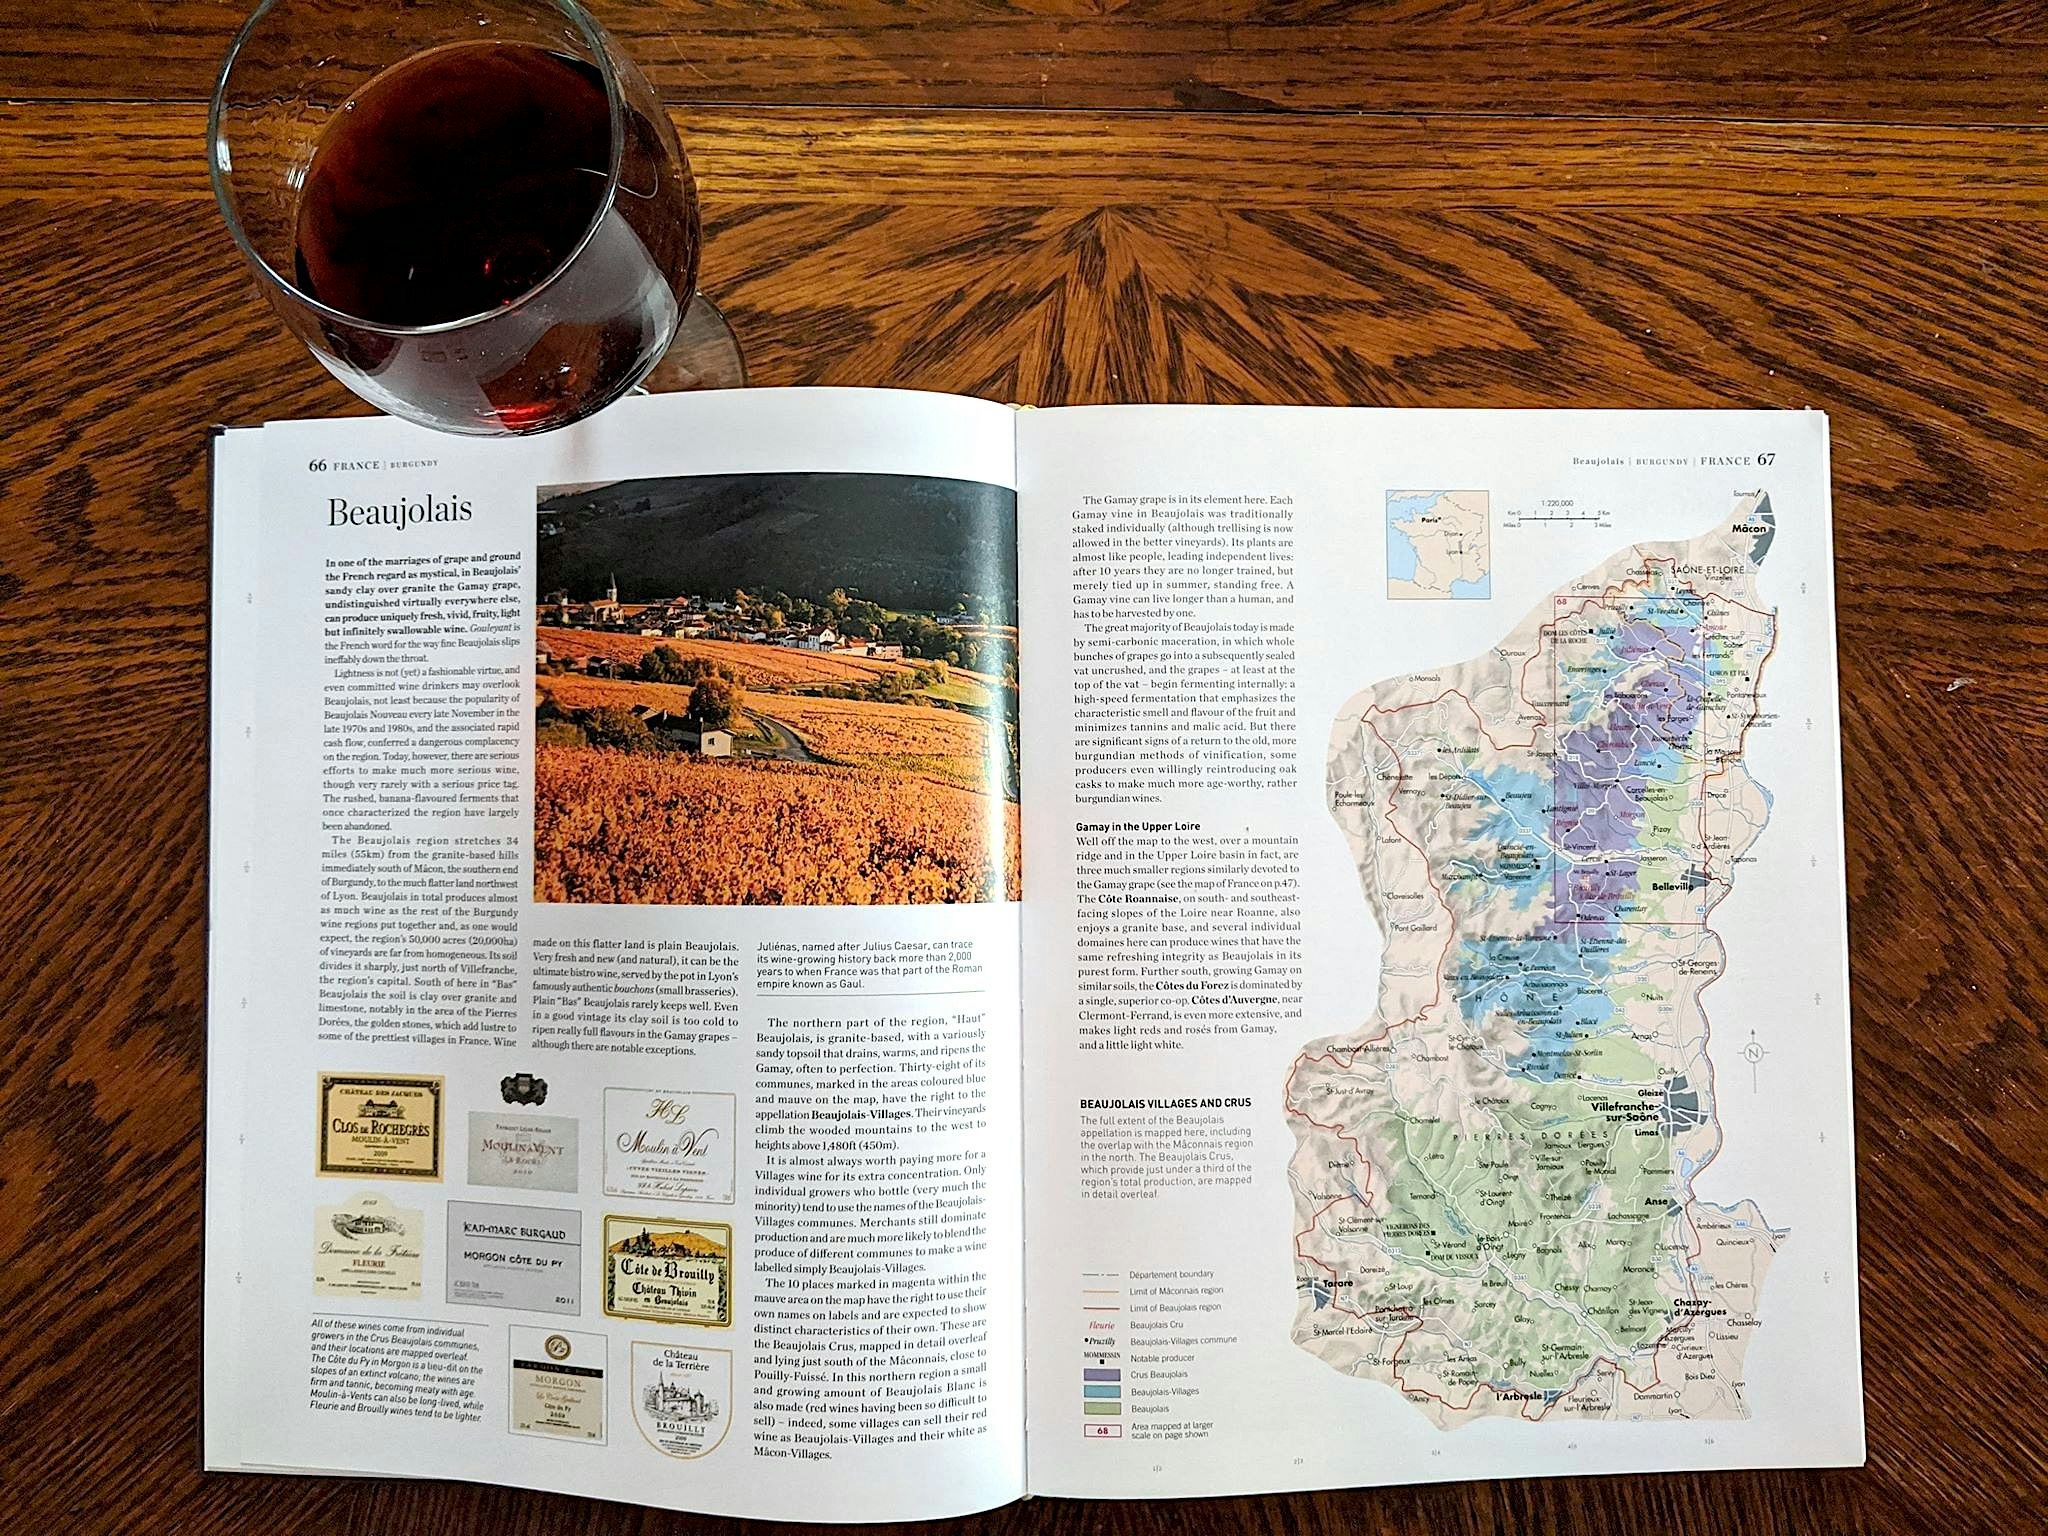 A glass of red wine sits on a oak table next to an open wine atlas